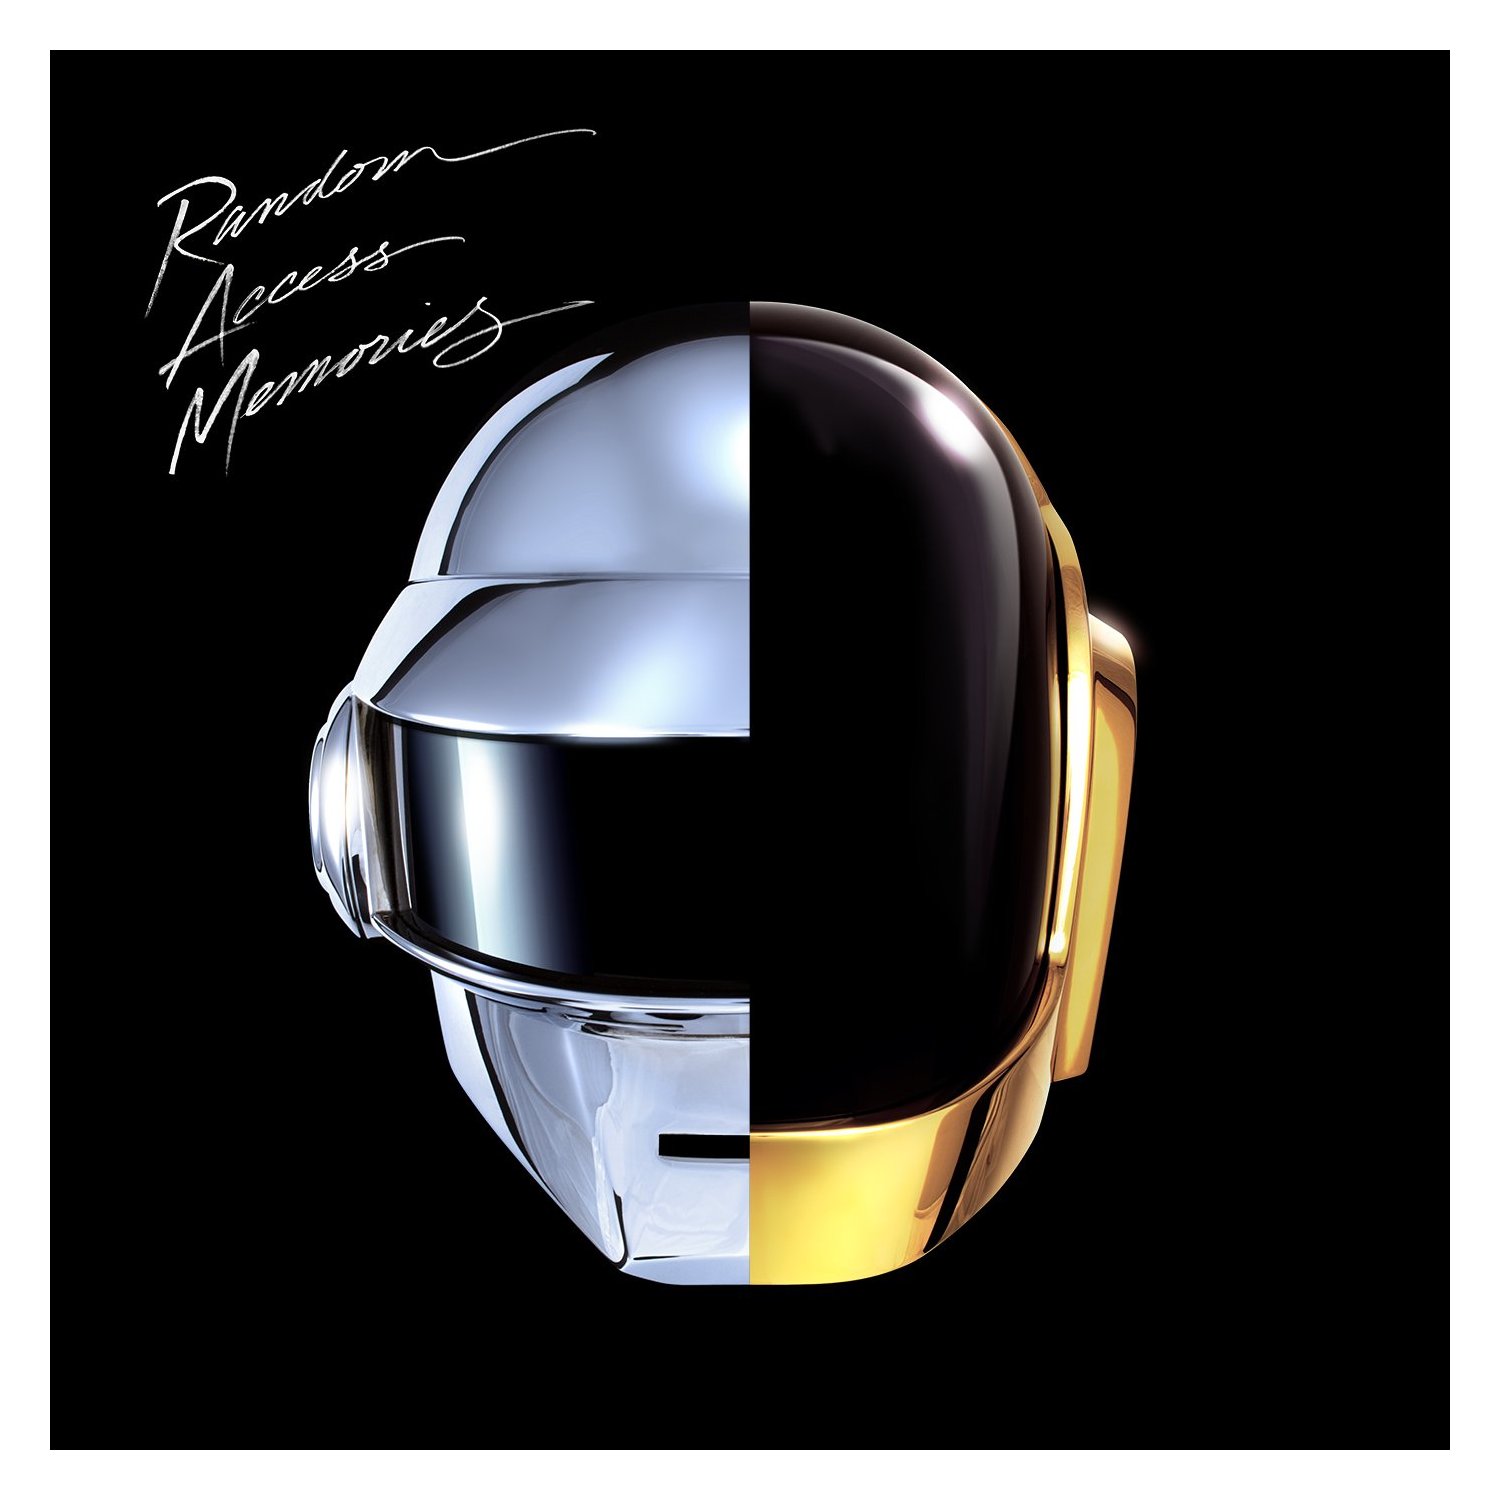 Преземи Daft Punk Ft. Pharrell Williams - Get Lucky (Extended Edit) free download